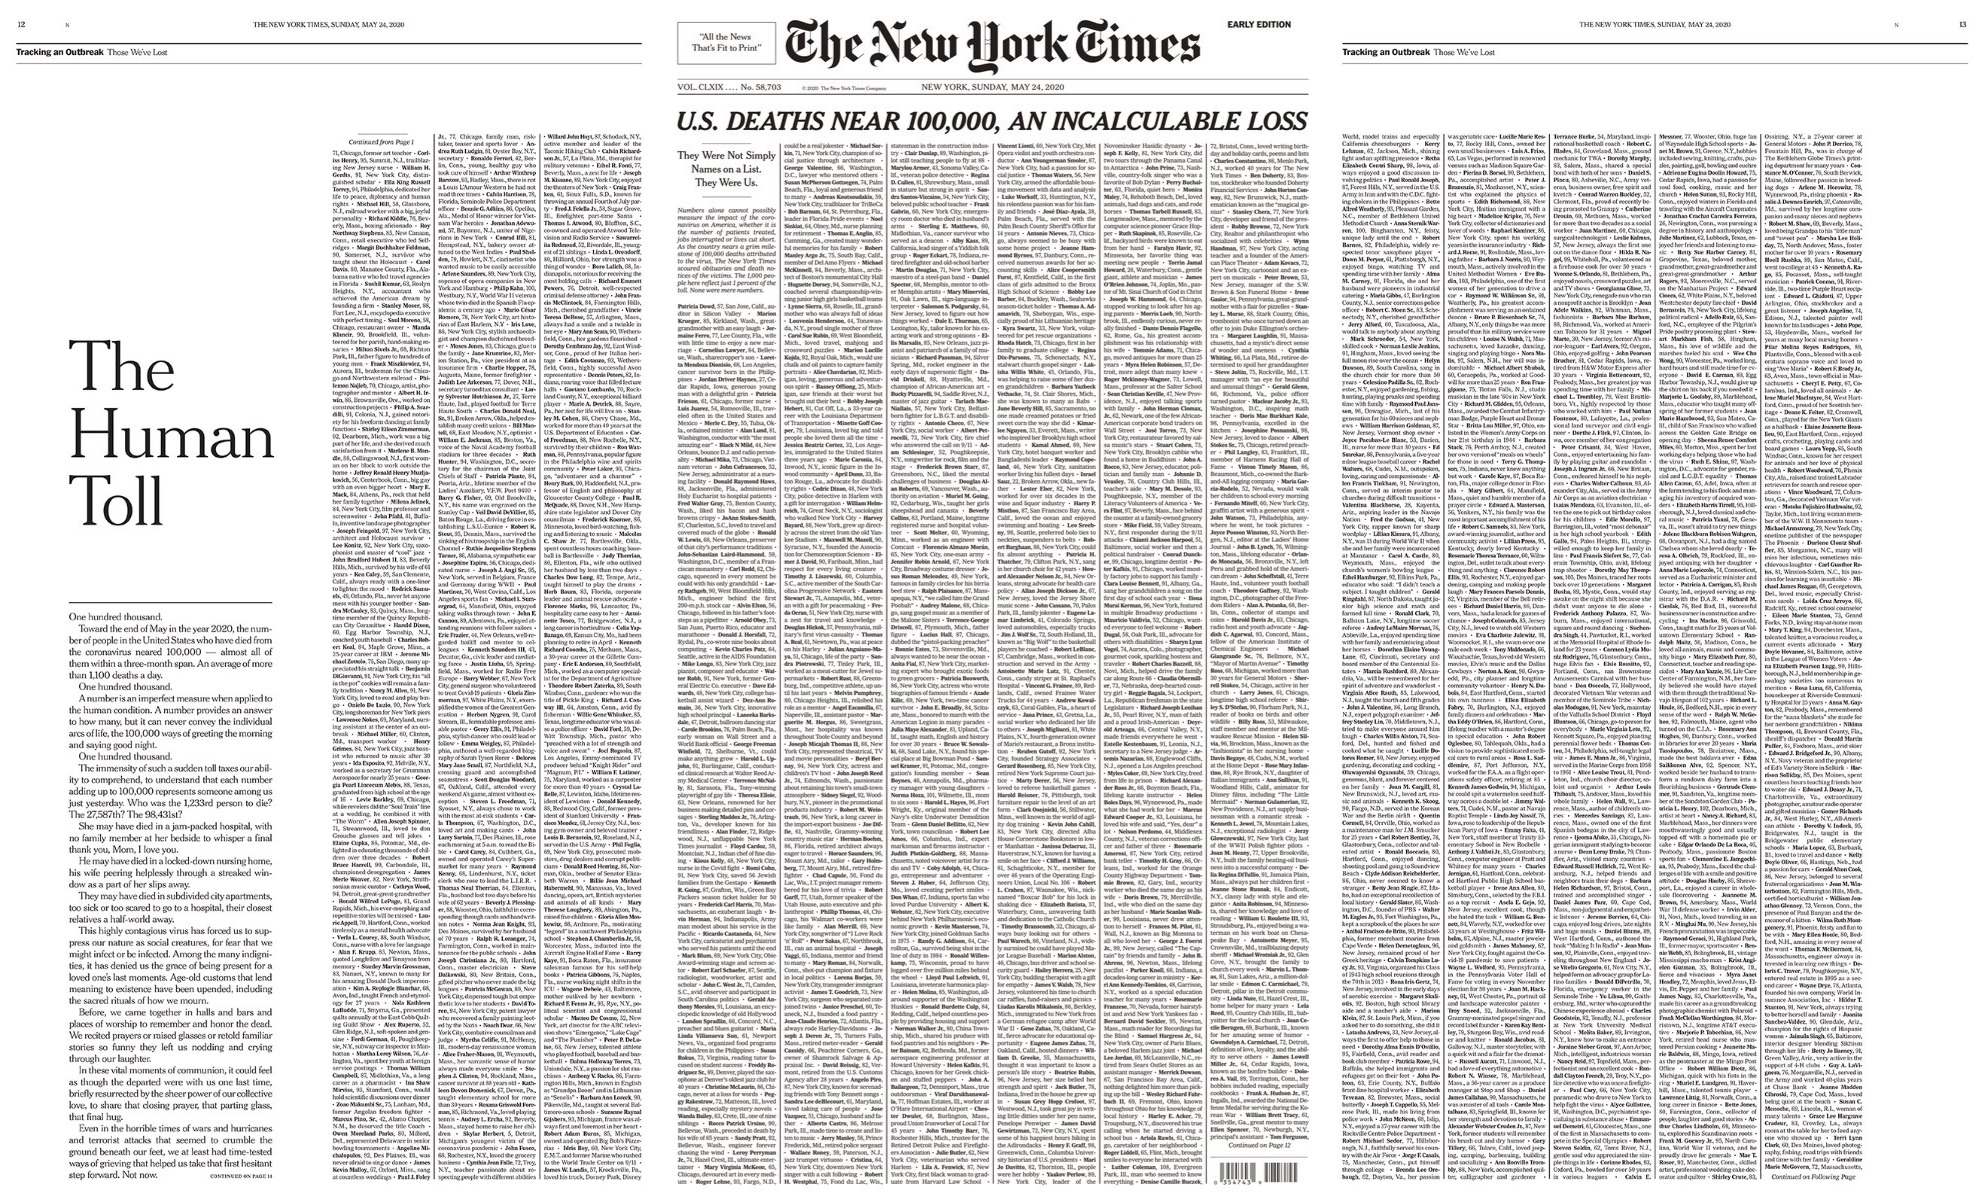 The New York Times dedicated three pages — including its entire cover — on Sunday, May 24th, to victims of COVID-19. [New York Times]